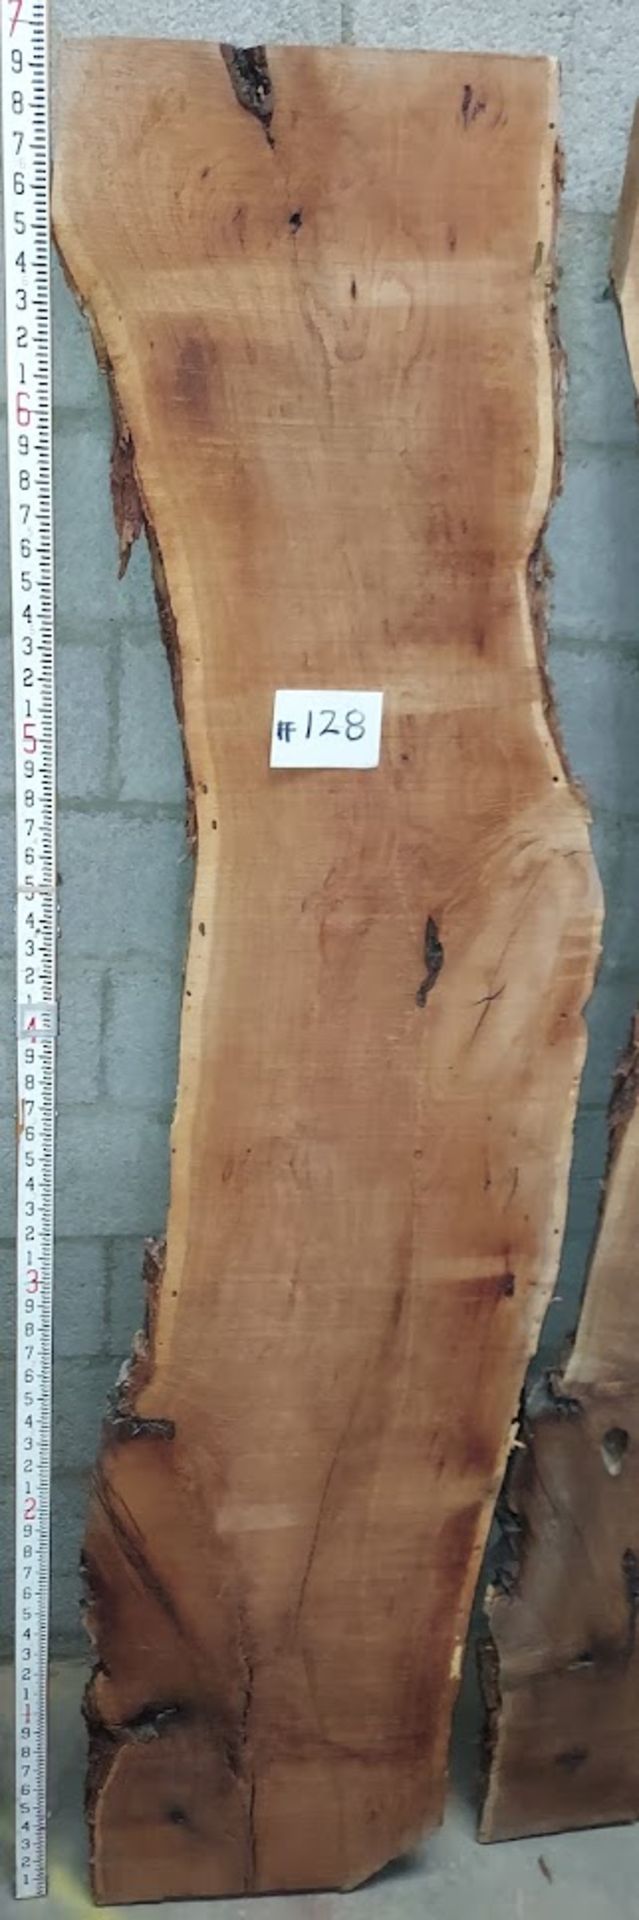 Mesquite Hardwood Lumber Slab, Size is approx. 84" x 18" x 2-1/4" Thick (Book Matched 129 & 130)